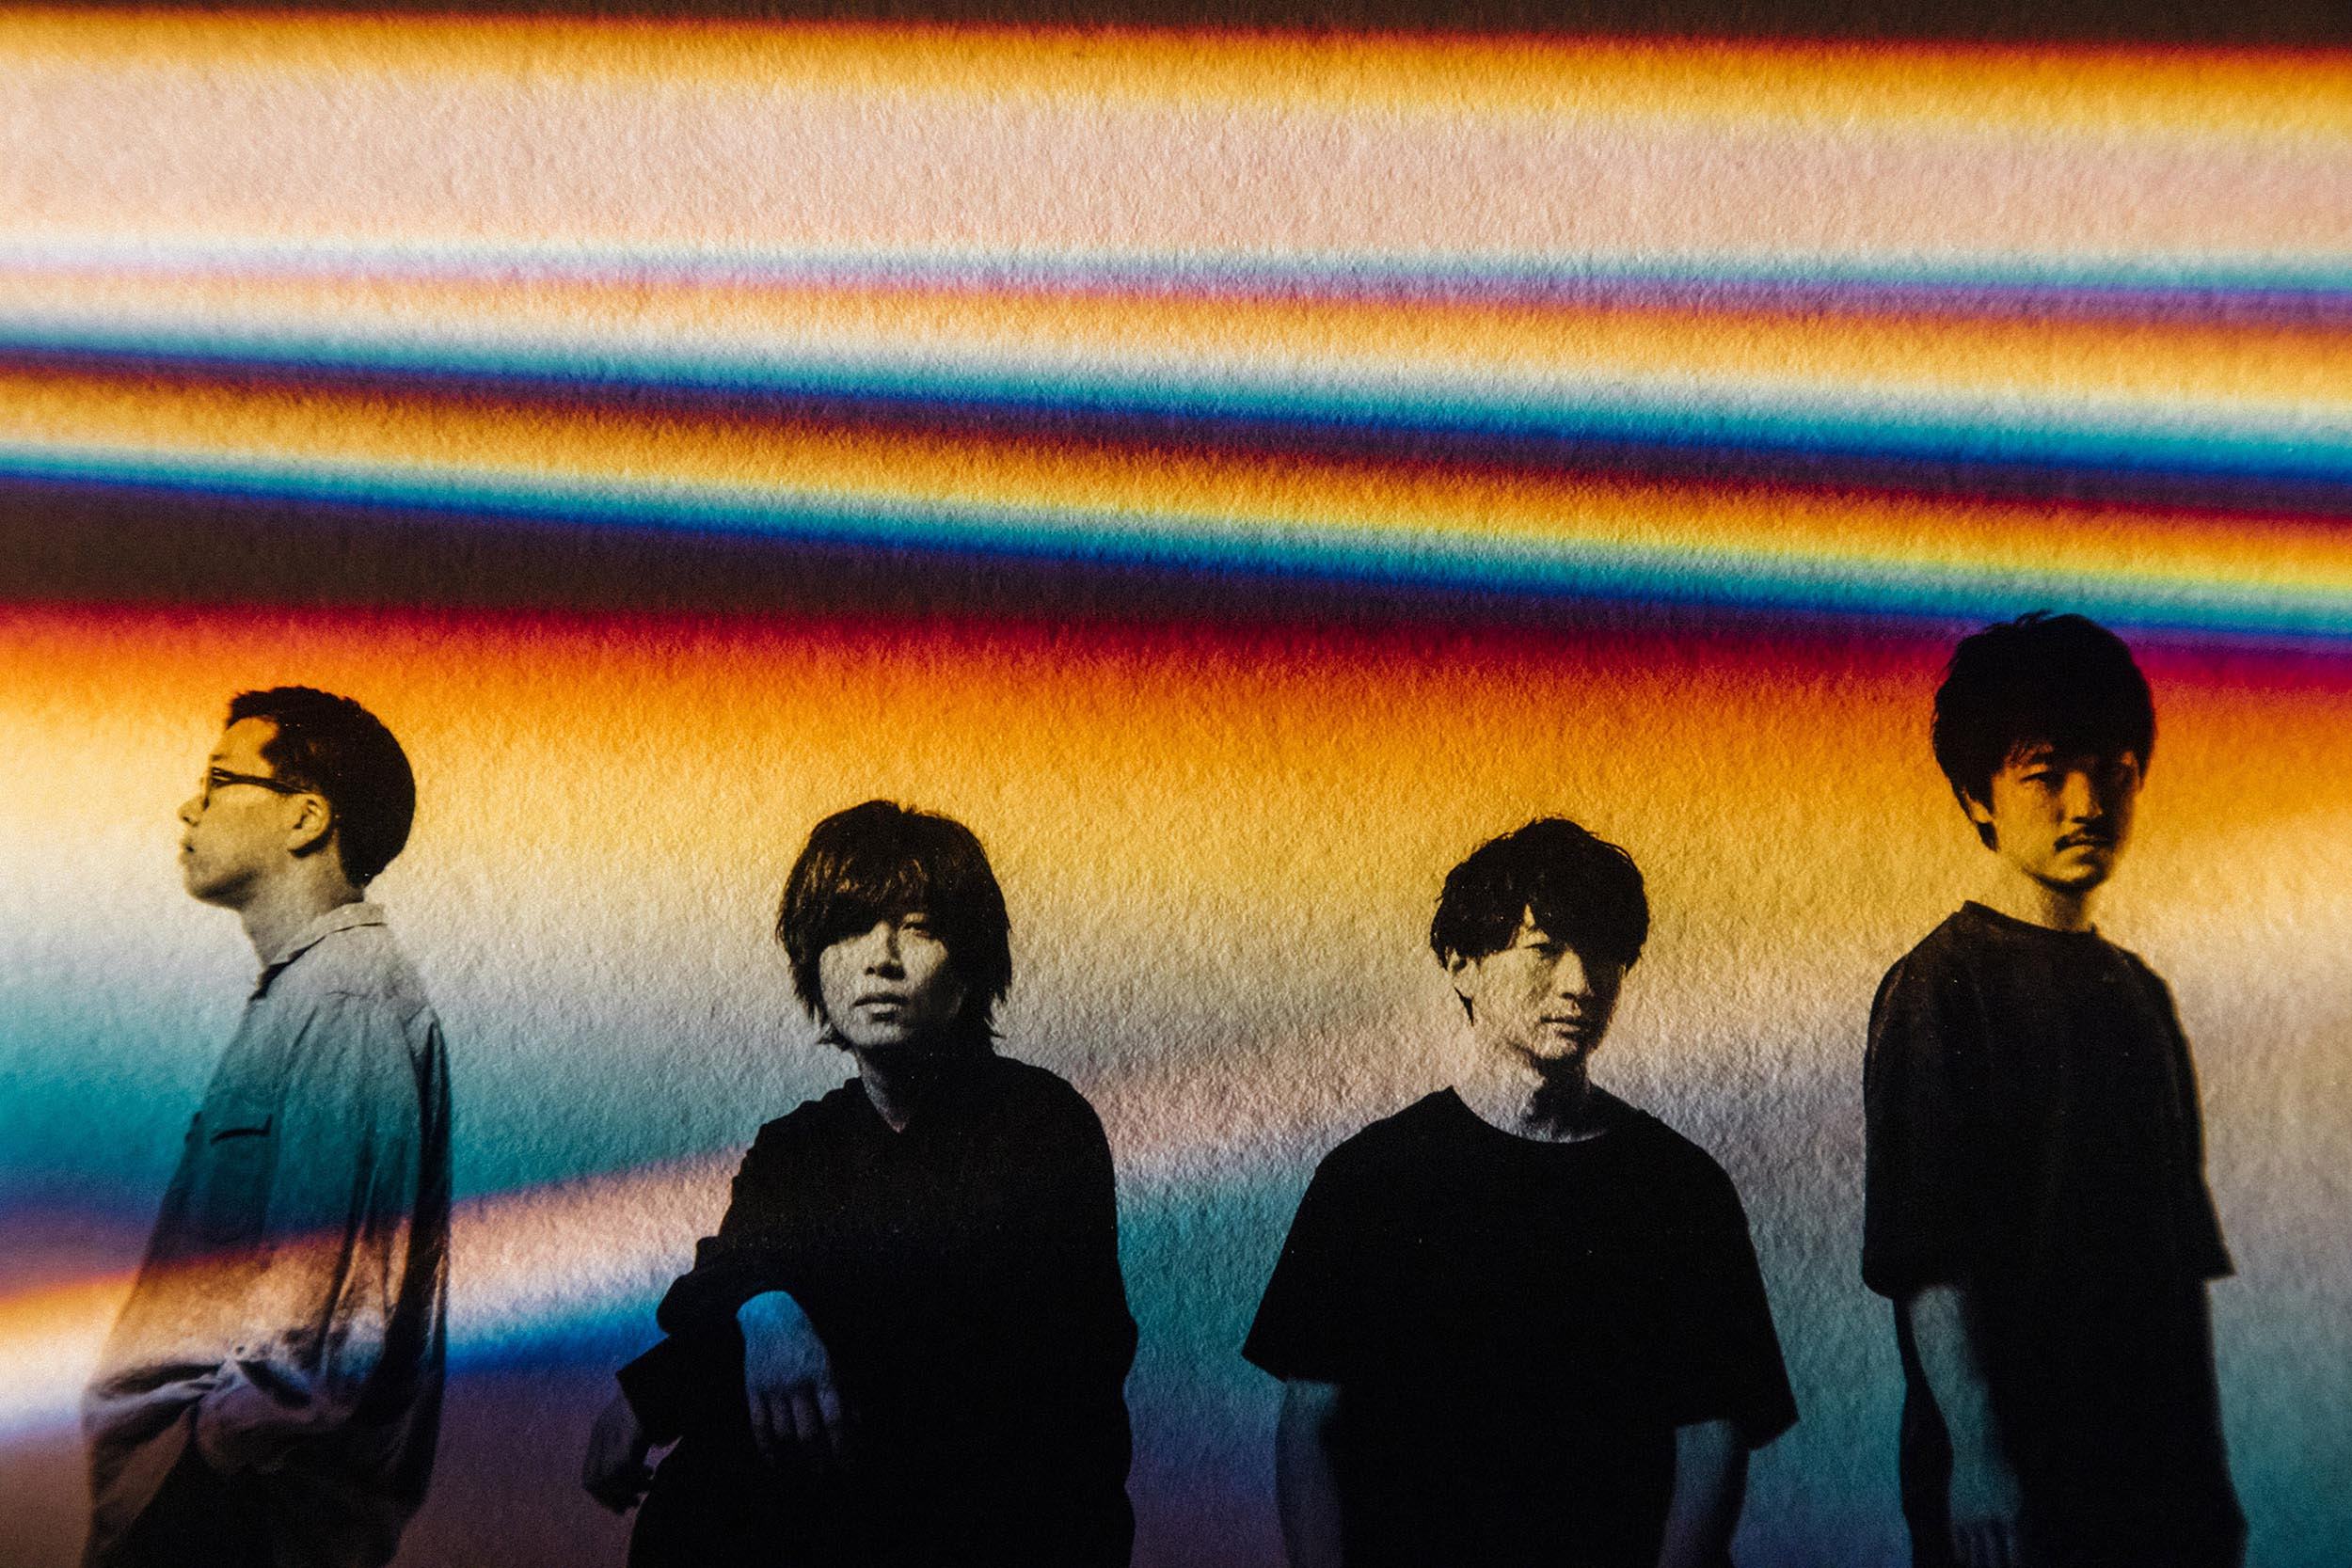 androp、全国8箇所をまわるワンマンツアー「androp one-man live tour 2023」の開催が決定！